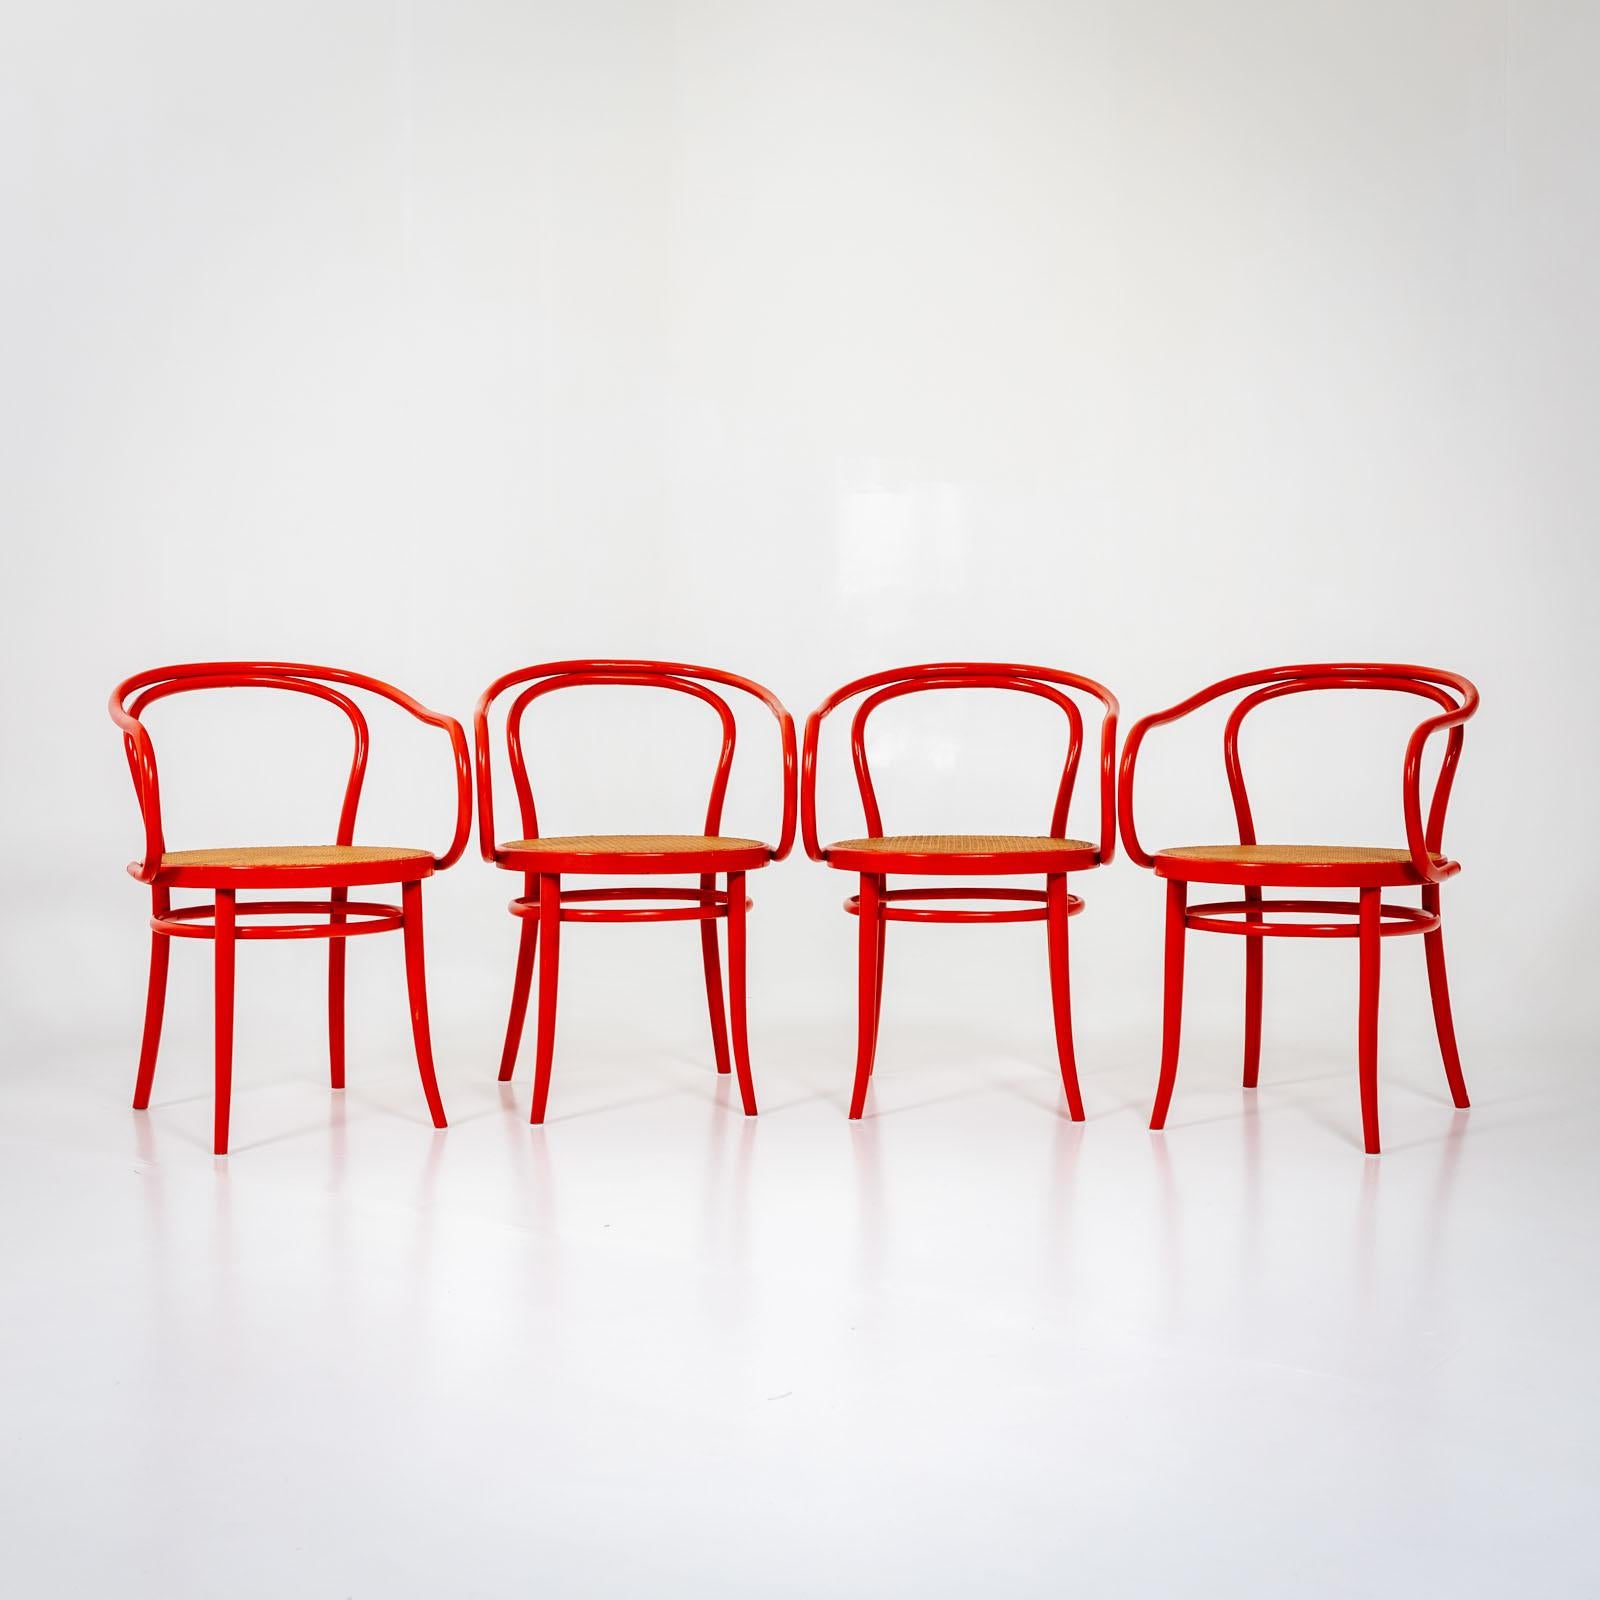 Set of four red bentwood chairs by Drevounia, formerly Czechoslovakia. The chairs are designed in the style of Thonet. The seats are covered with Viennese wickerwork. Label on the underside: 